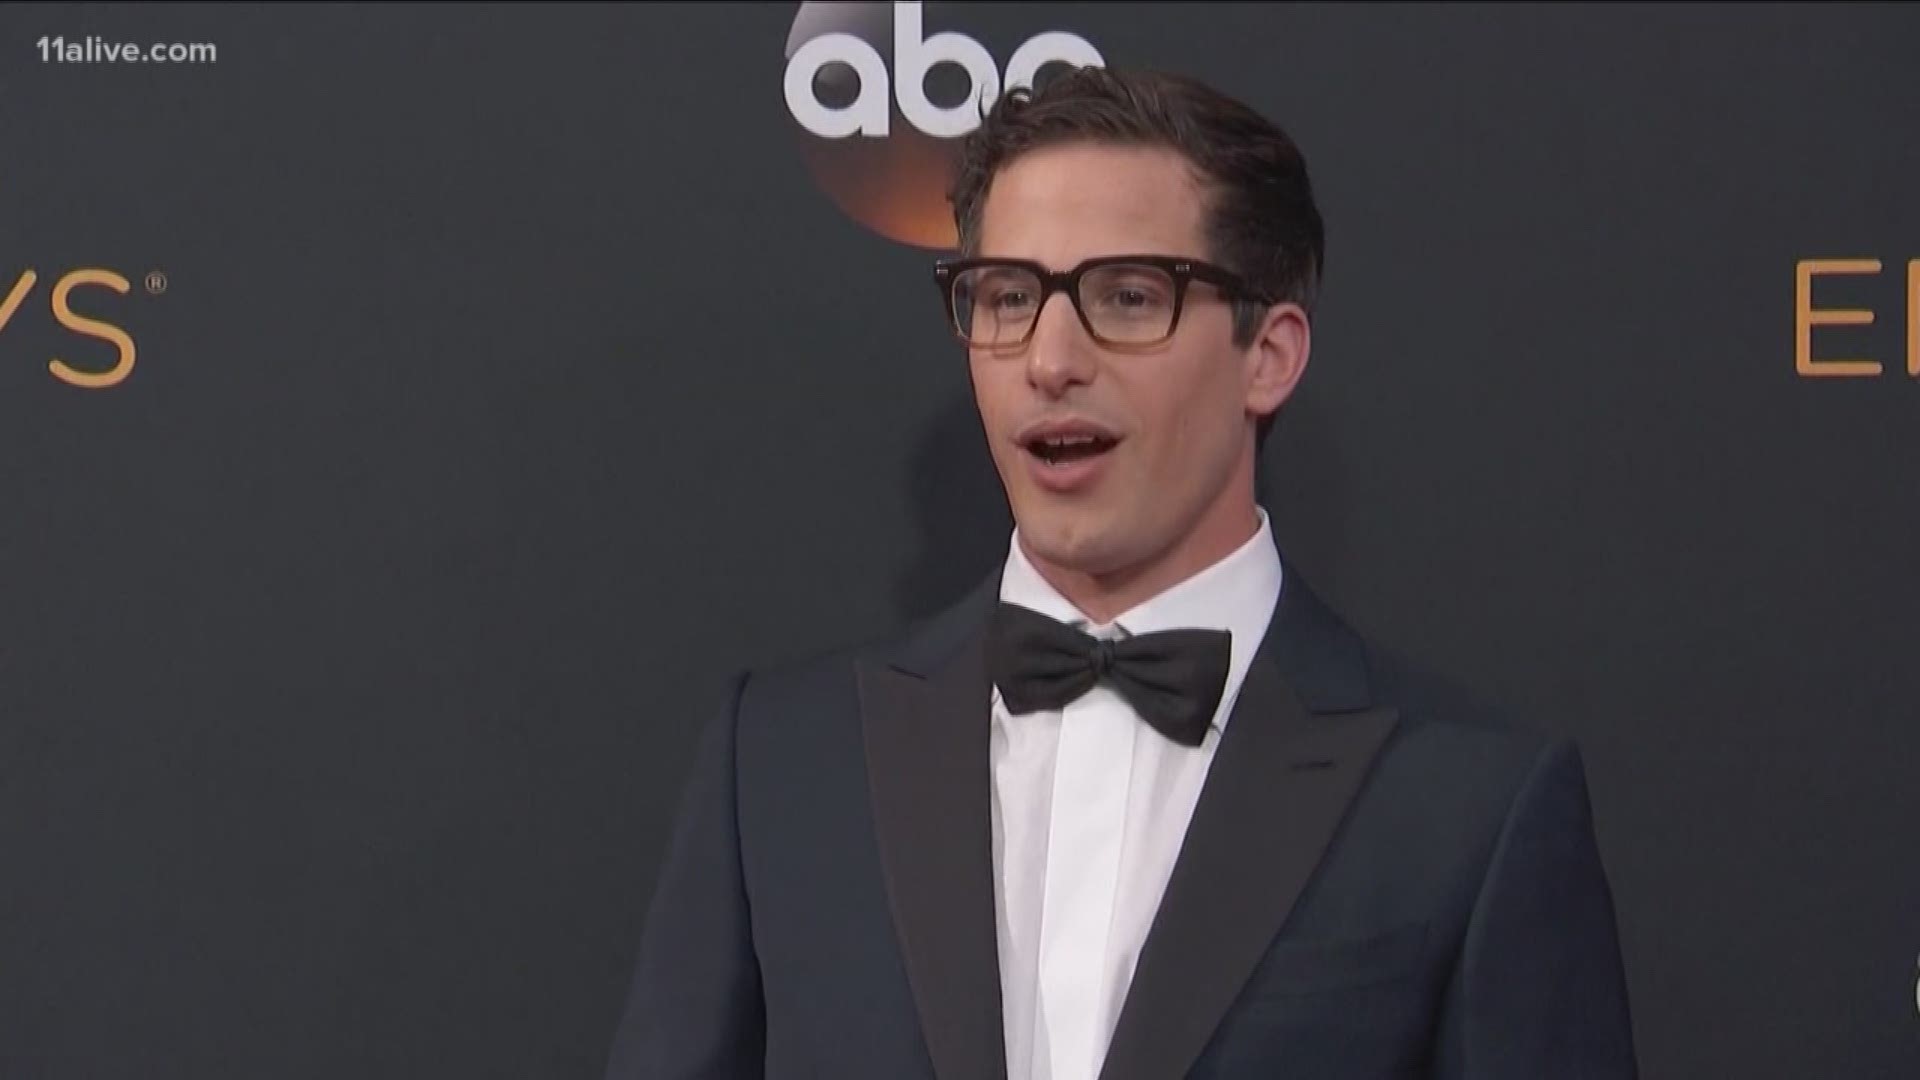 Andy Samberg is no stranger to on stage laughs, and now he is heading to the big stage.